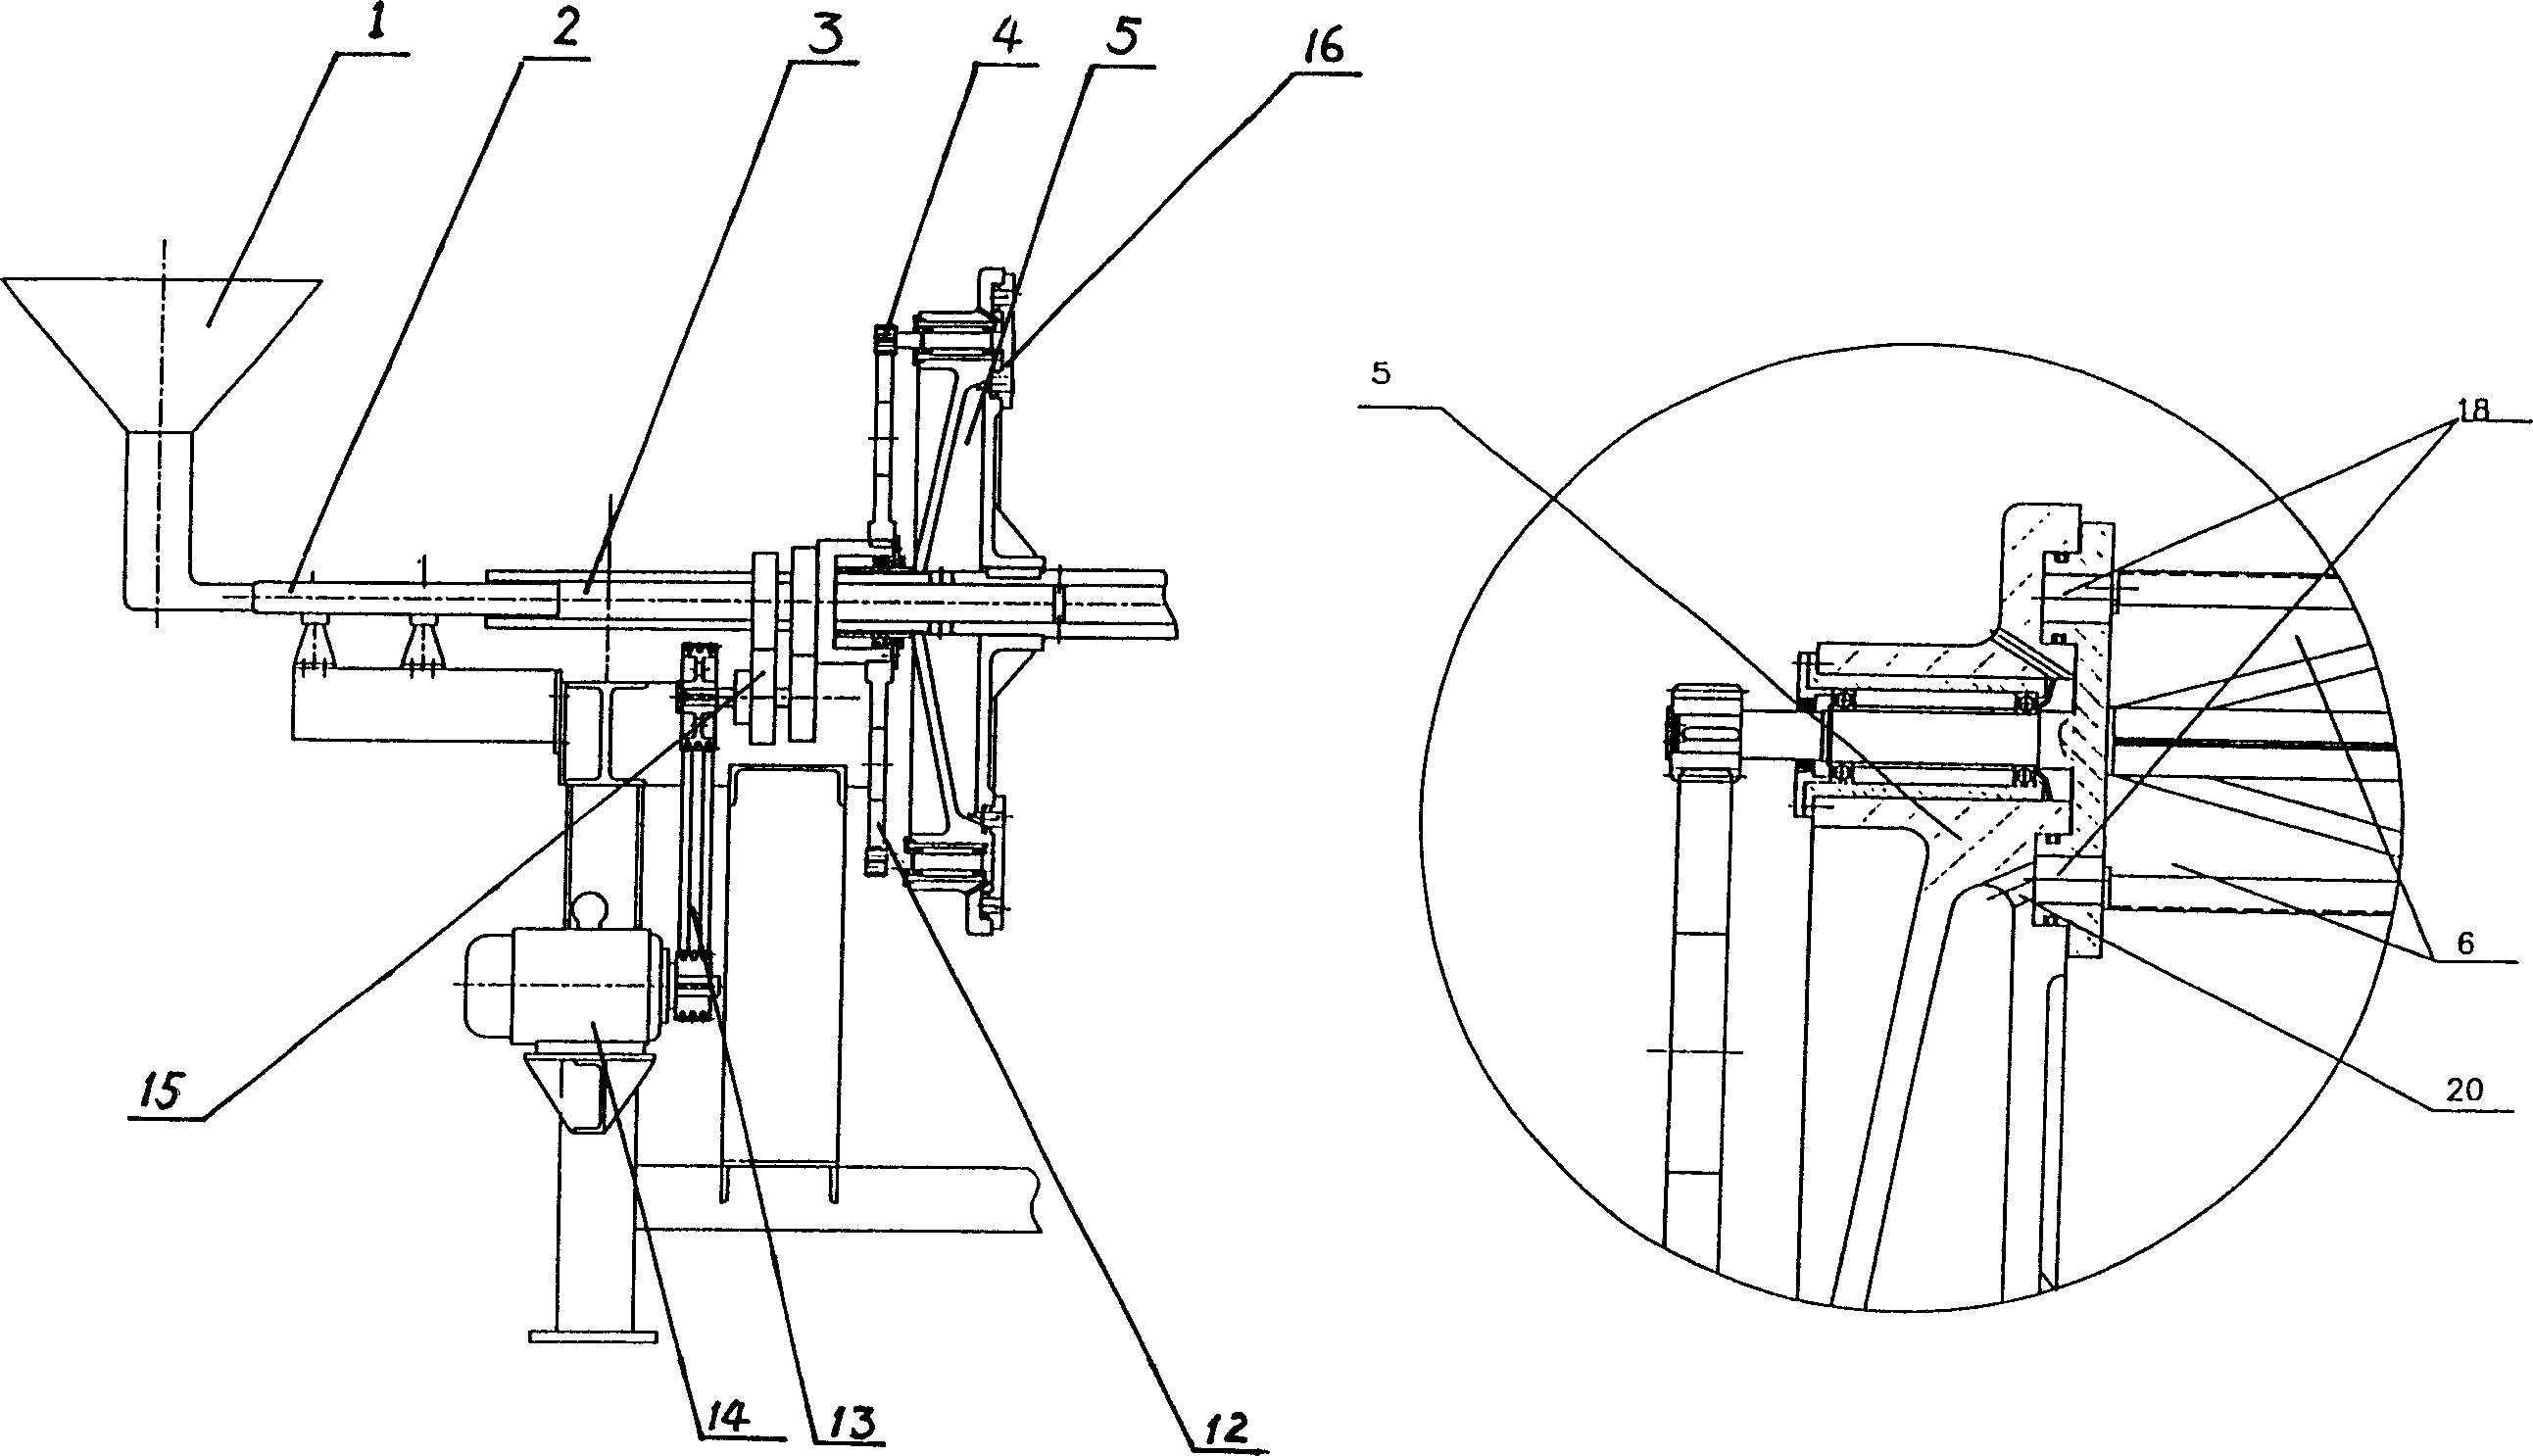 Rotary tapered chute type centrifugal concentrator